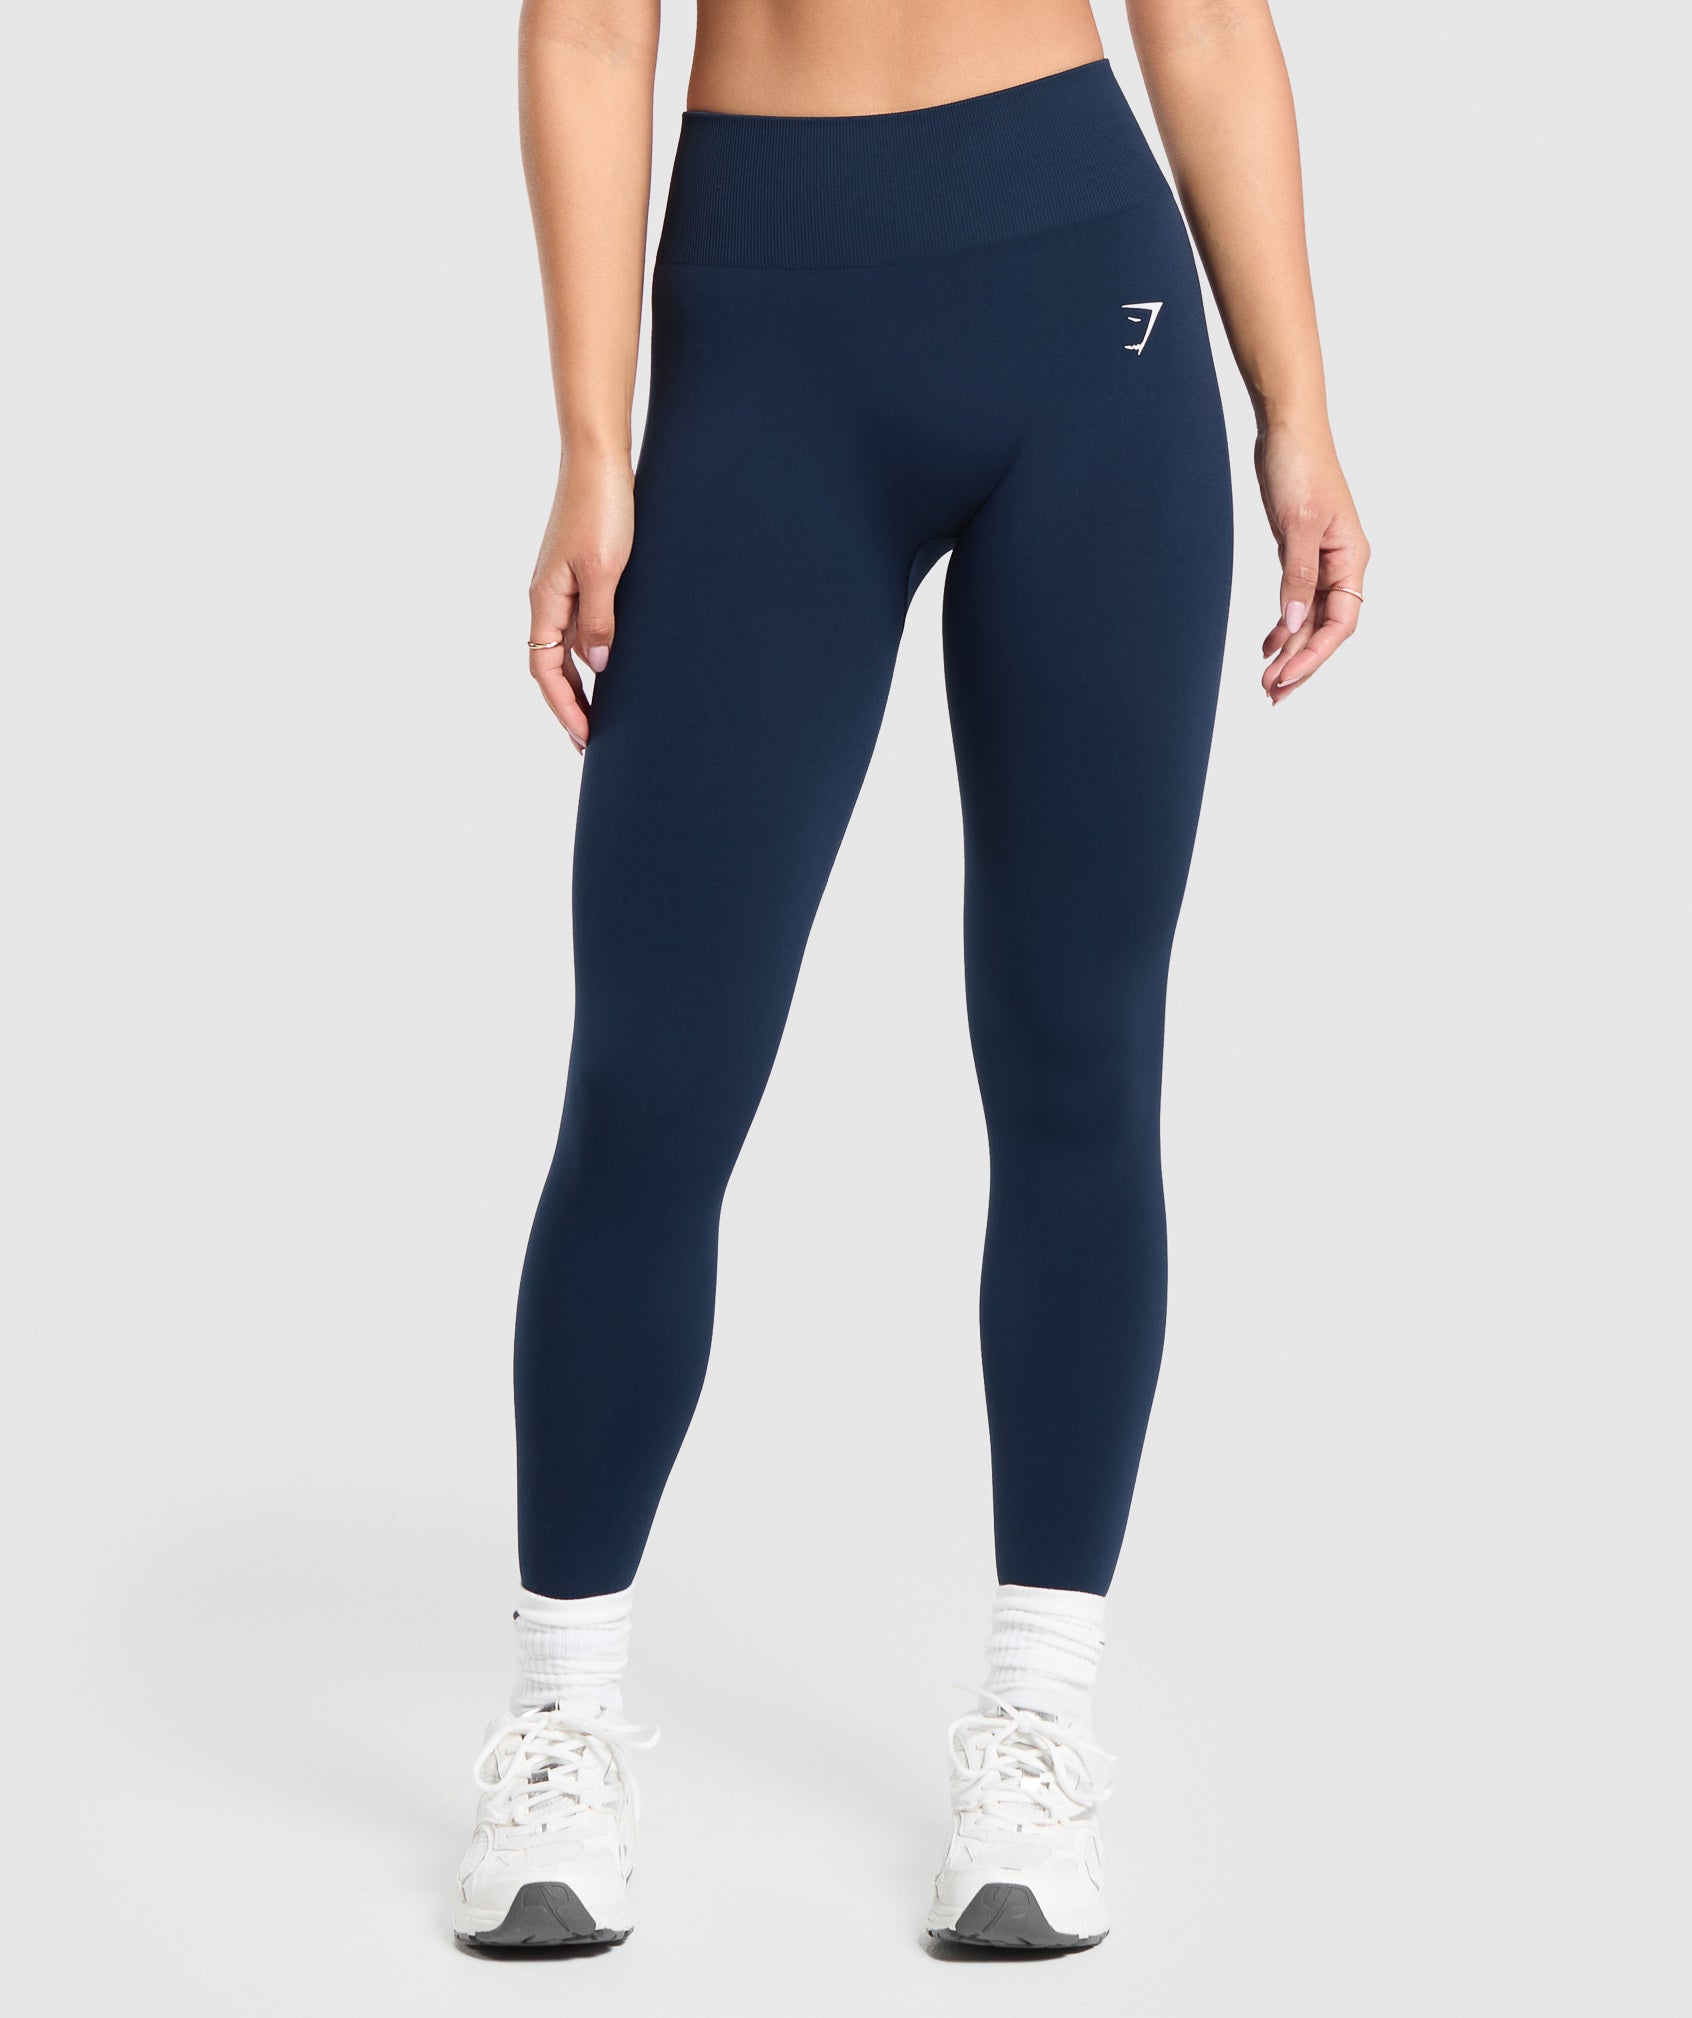 Everyday Seamless Leggings in Blue - view 1